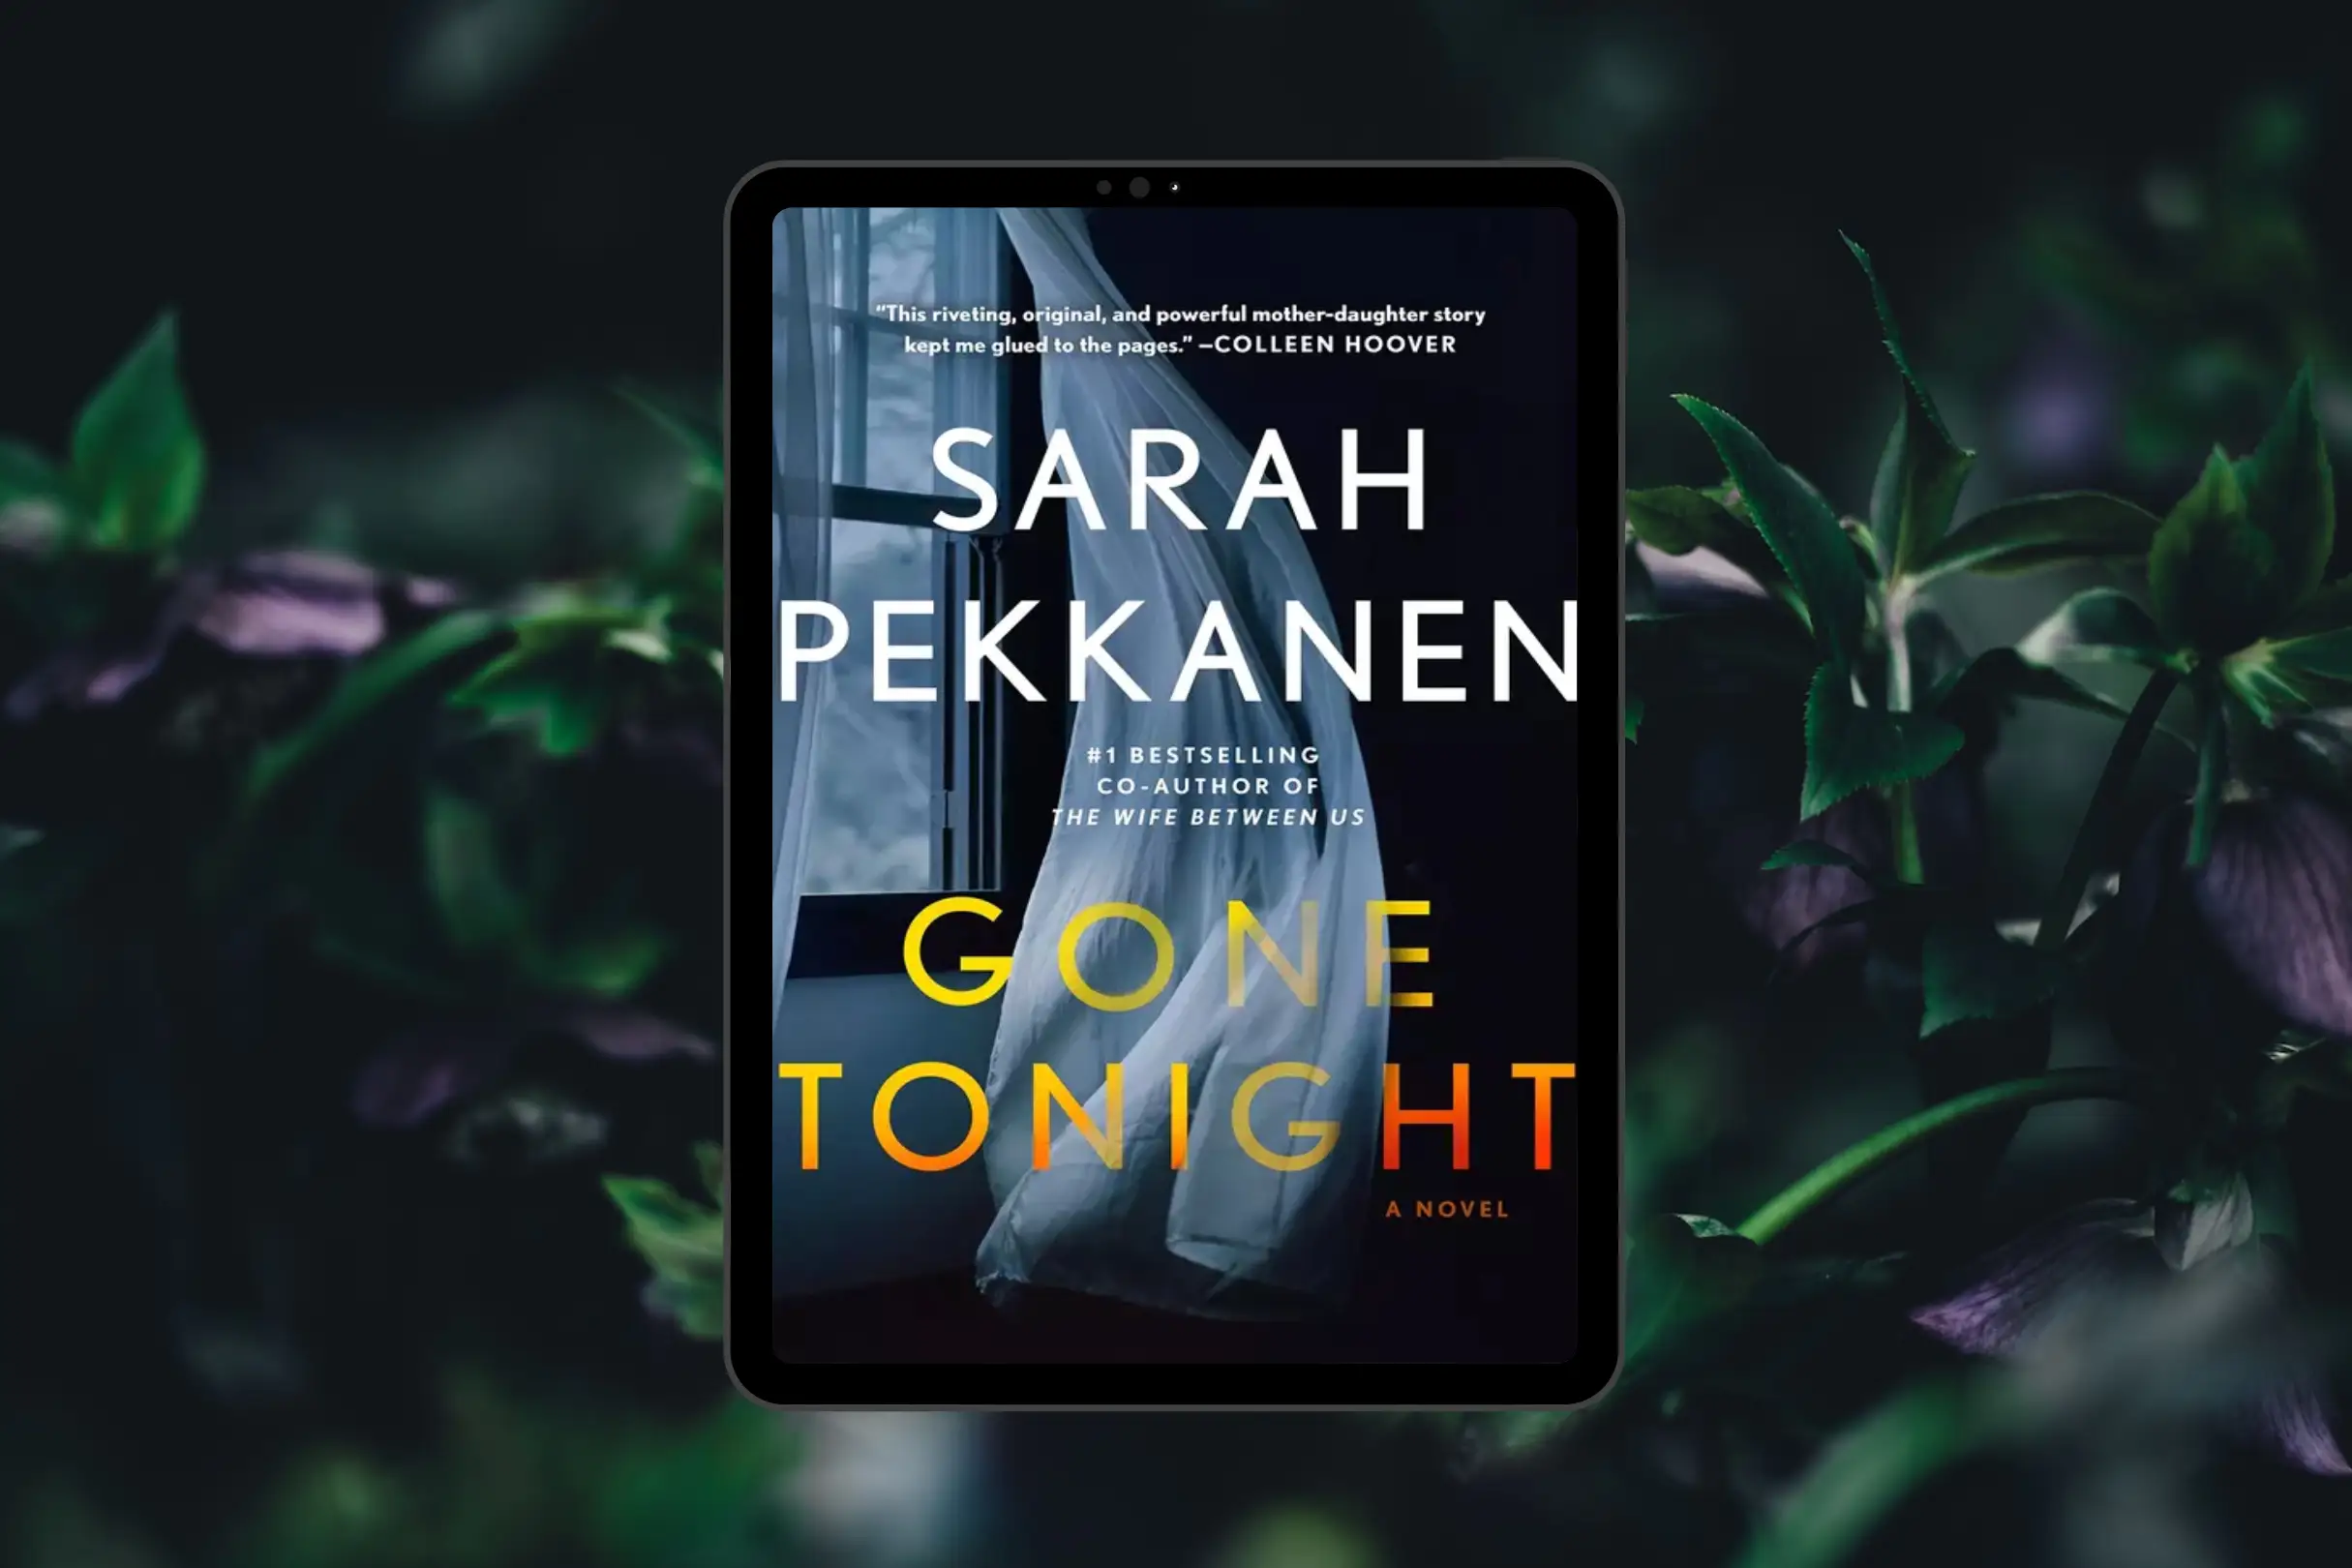 gone_tonight_book_club_questions